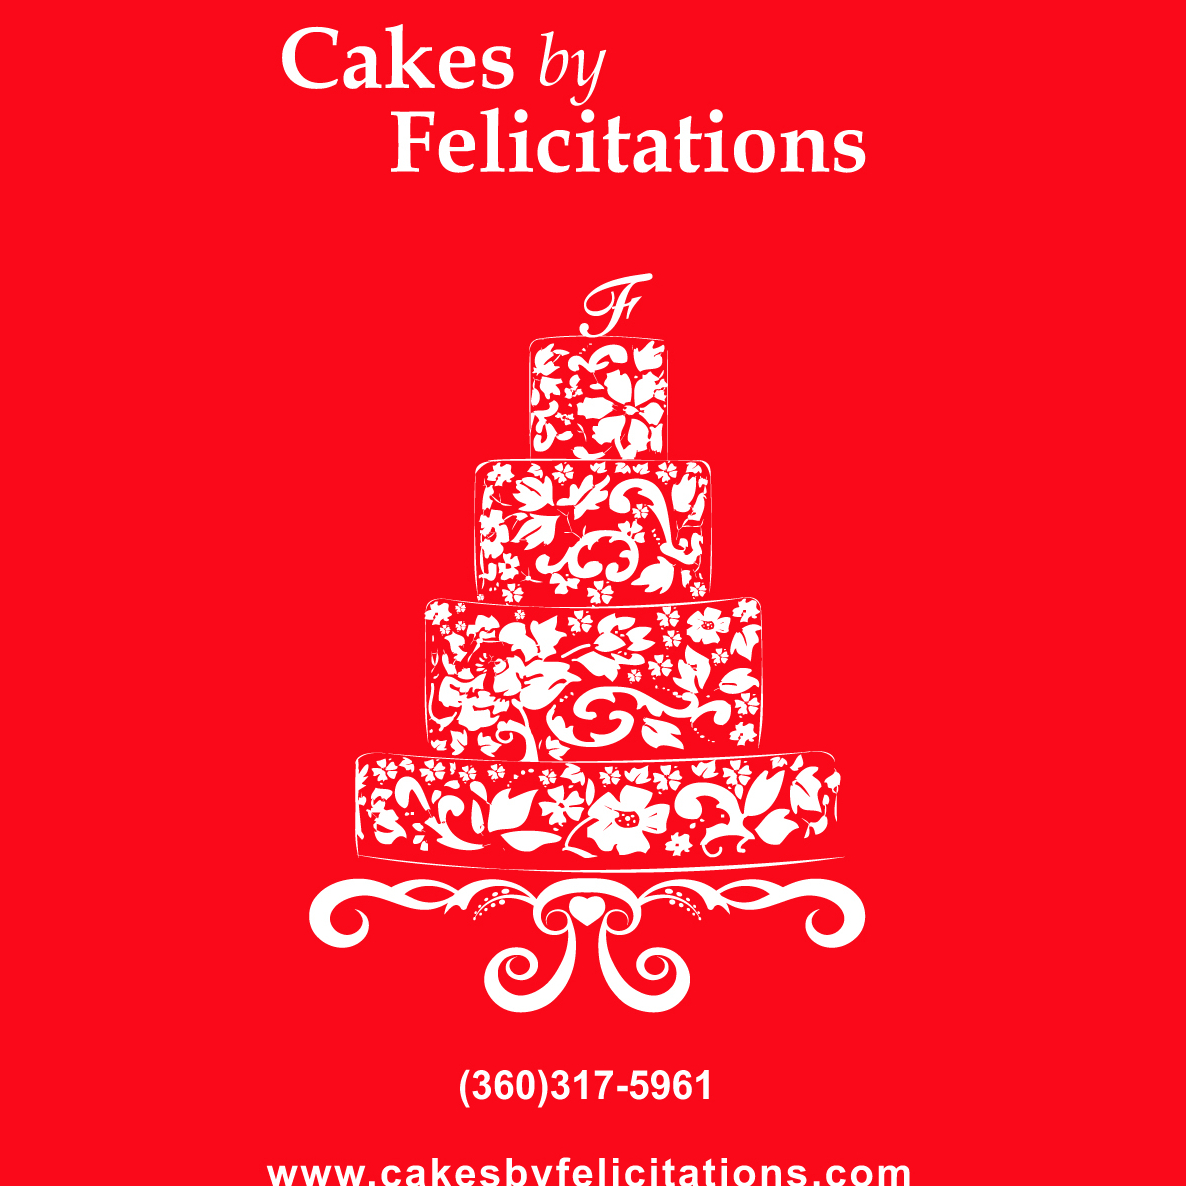 Cakes by Felicitations